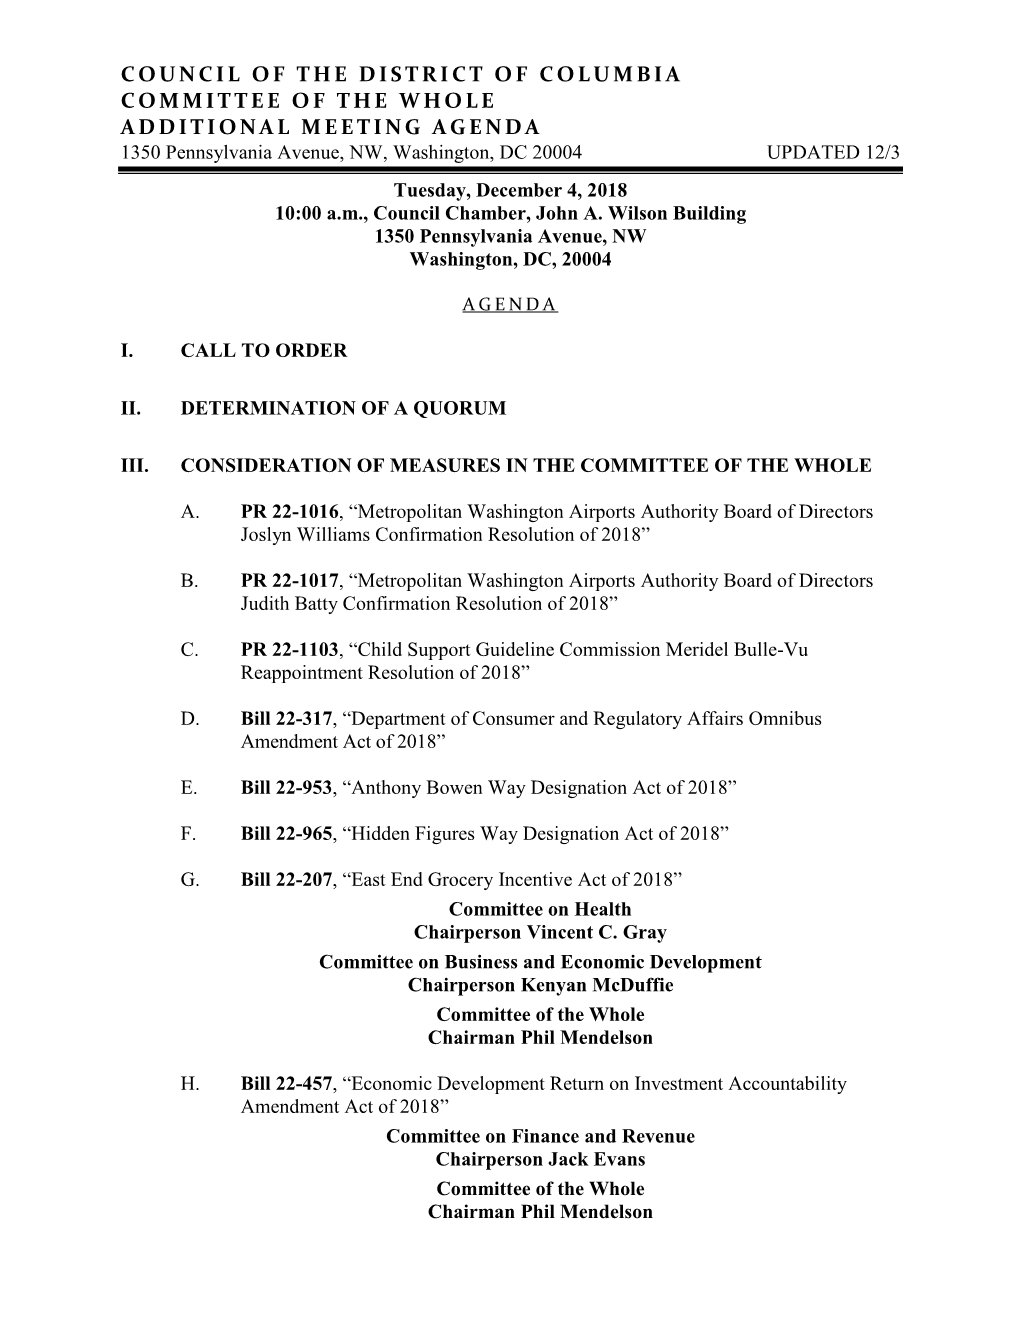 COUNCIL of the DISTRICT of COLUMBIA COMMITTEE of the WHOLE ADDITIONAL MEETING AGENDA 1350 Pennsylvania Avenue, NW, Washington, DC 20004 UPDATED 12/3